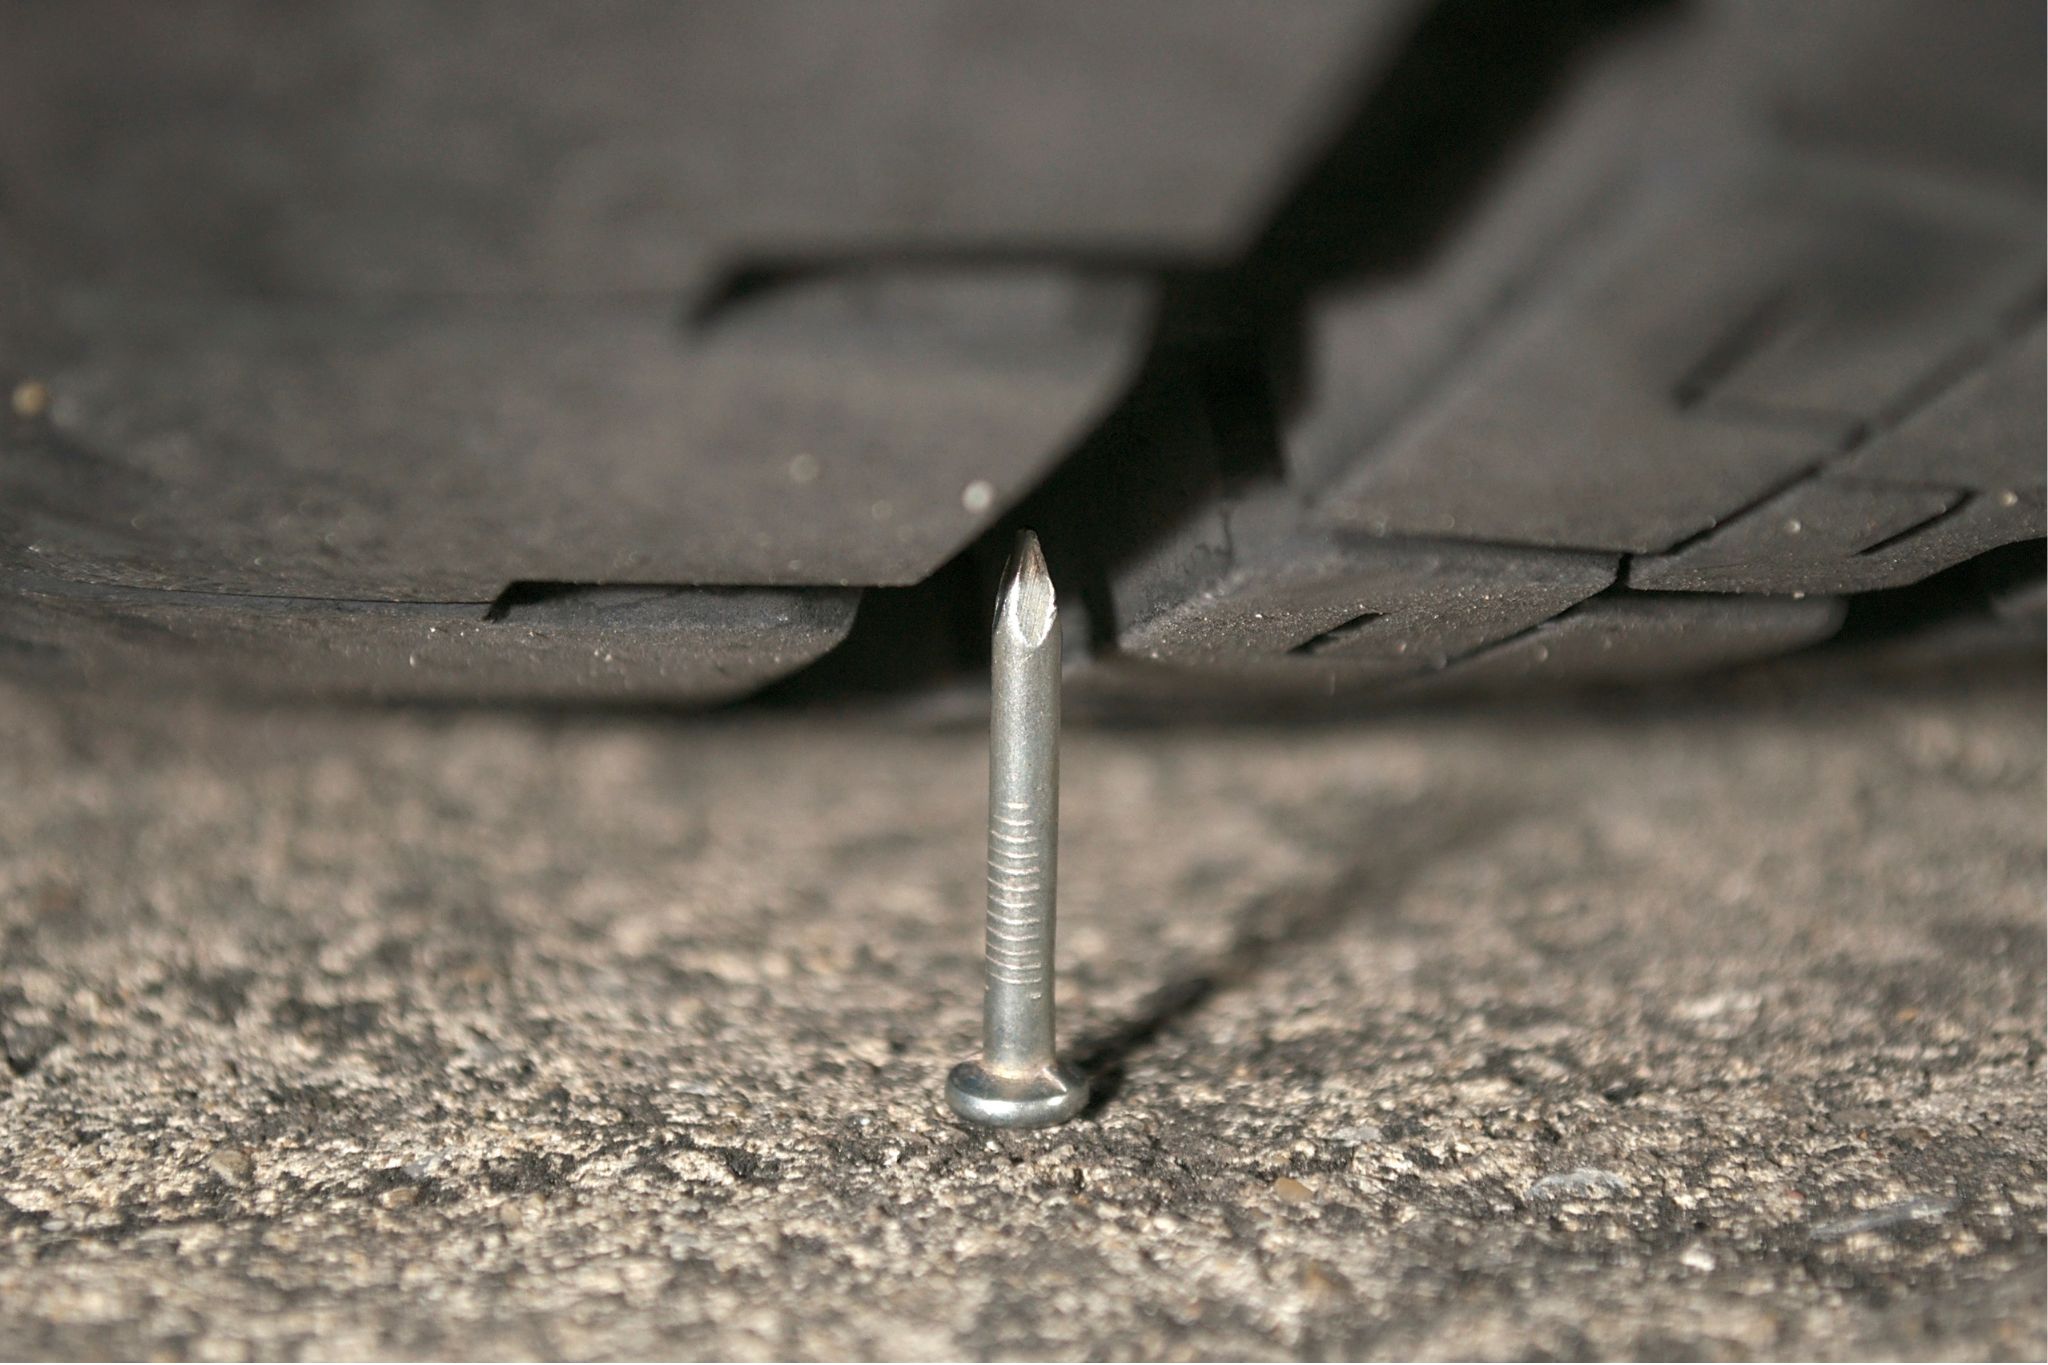 How To Catch Someone Putting Nails In Your Tire